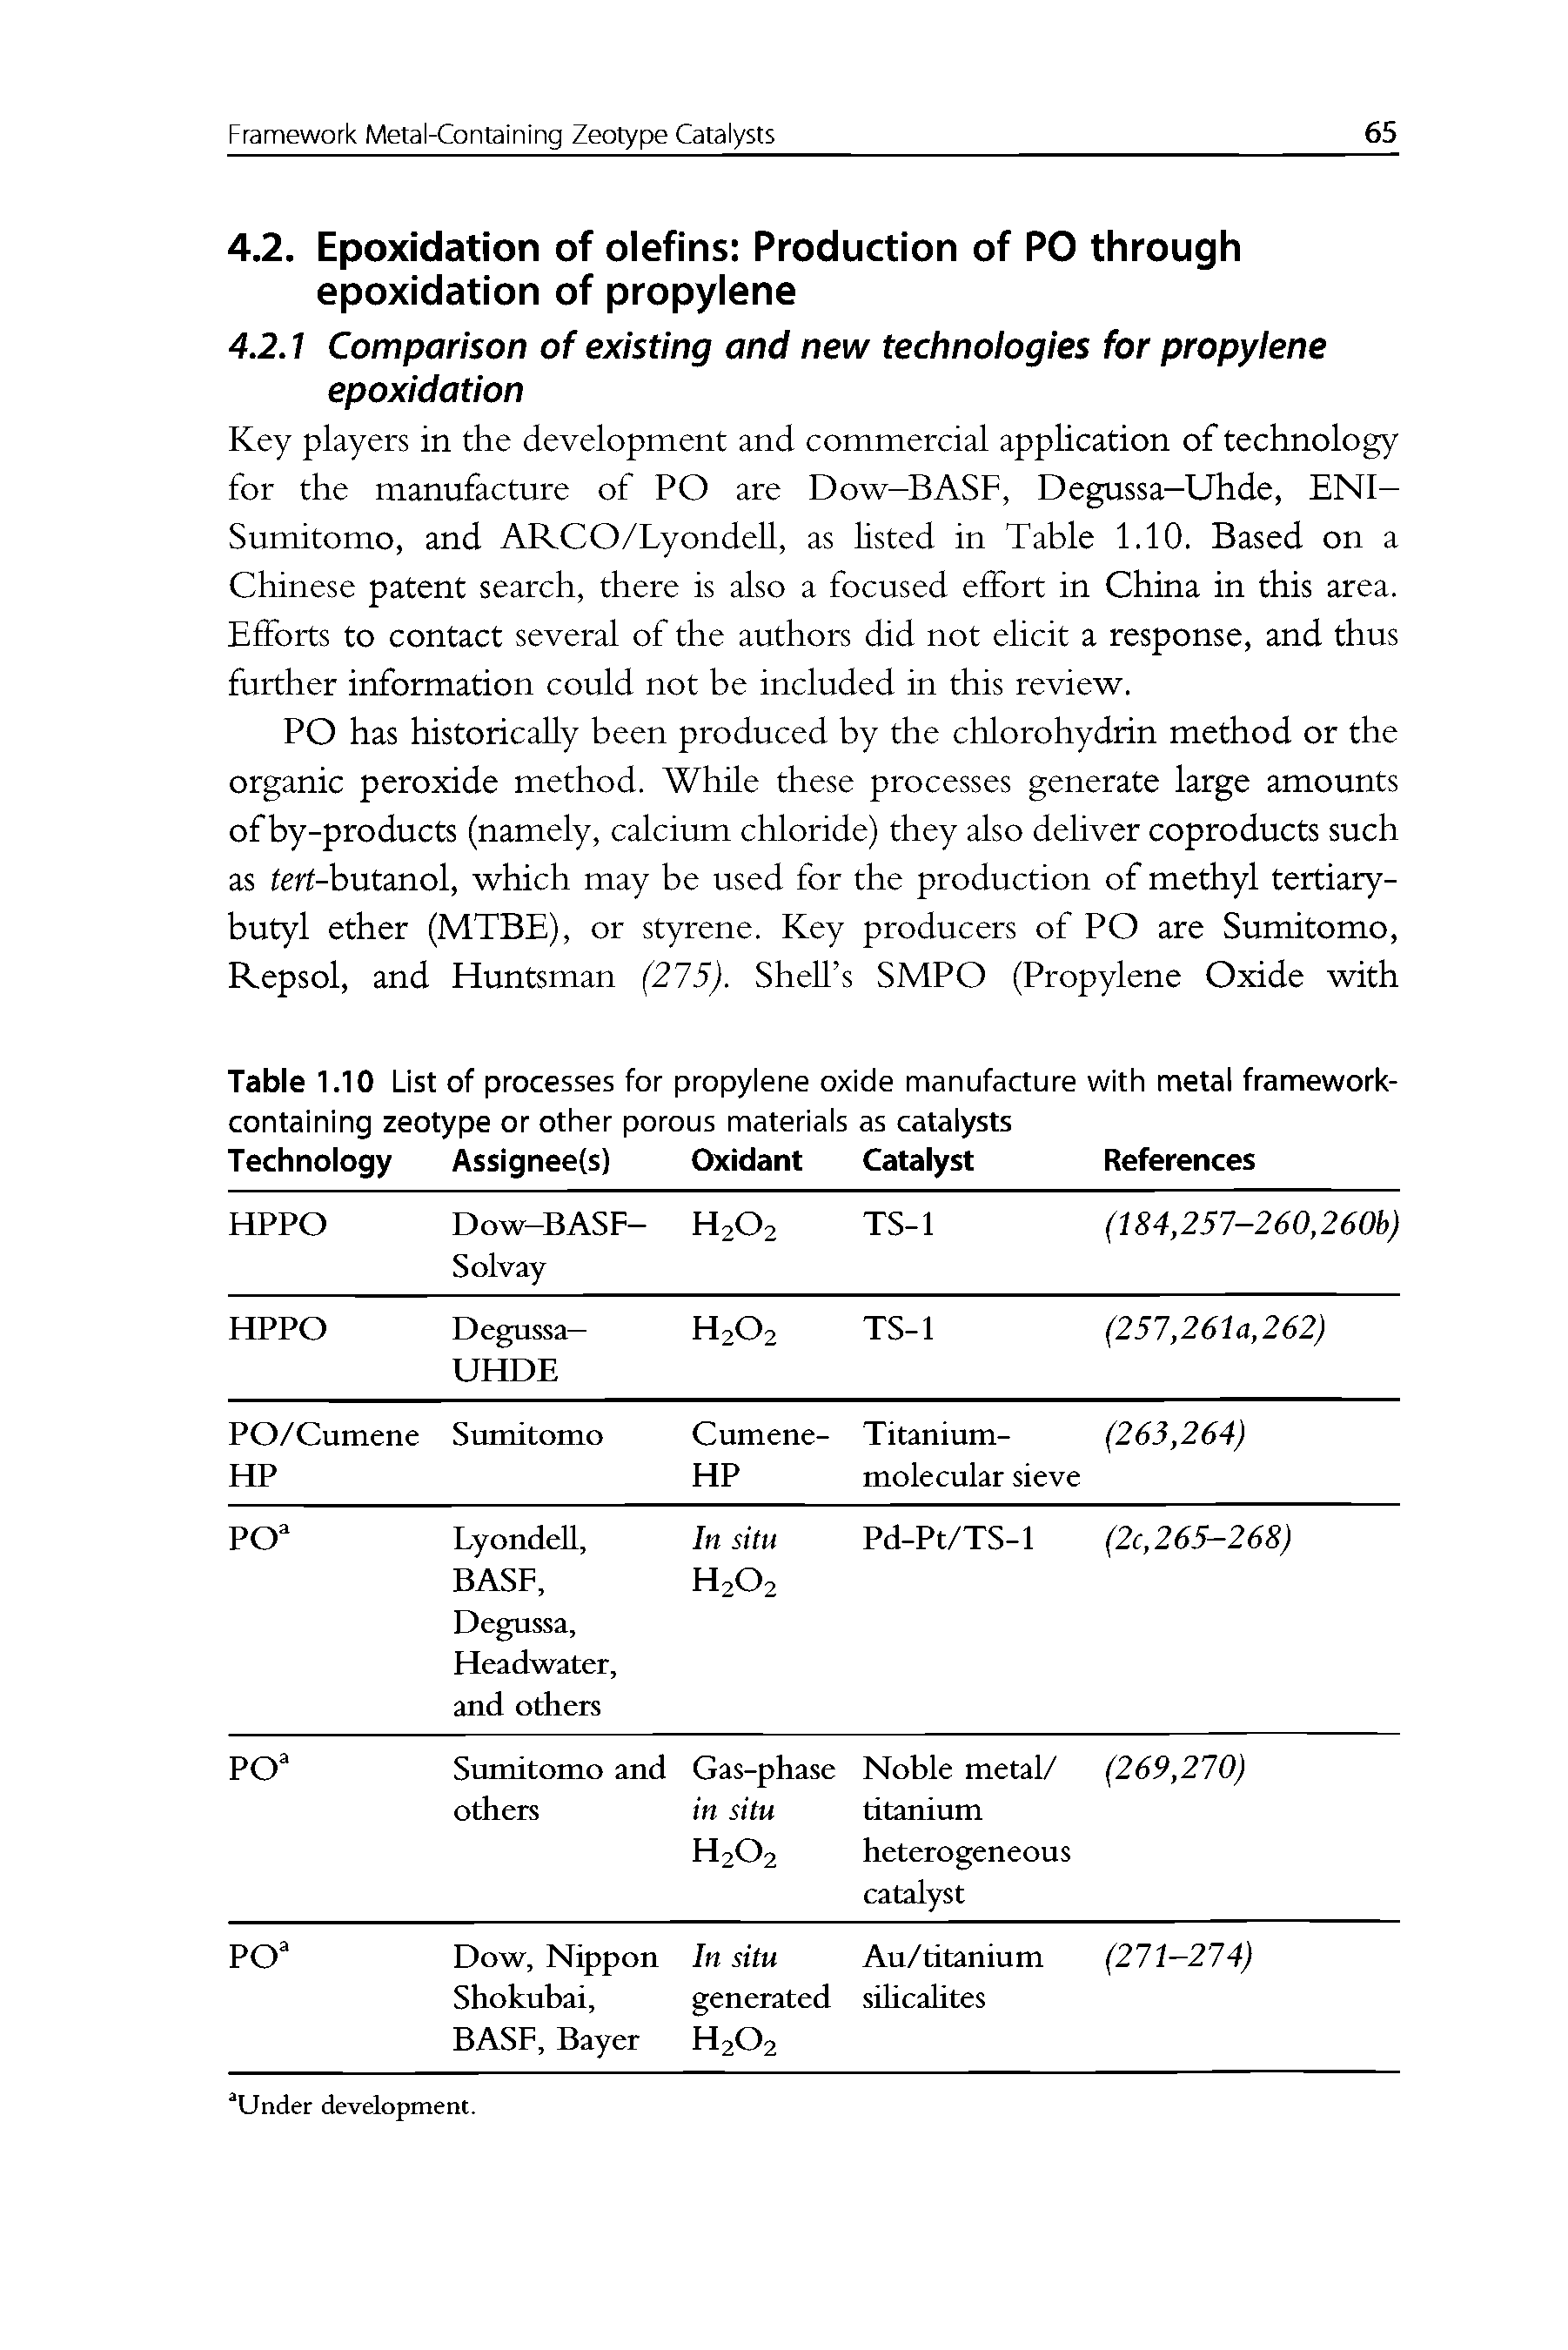 Table 1.10 List of processes for propylene oxide manufacture with metal framework-containing zeotype or other porous materials as catalysts...